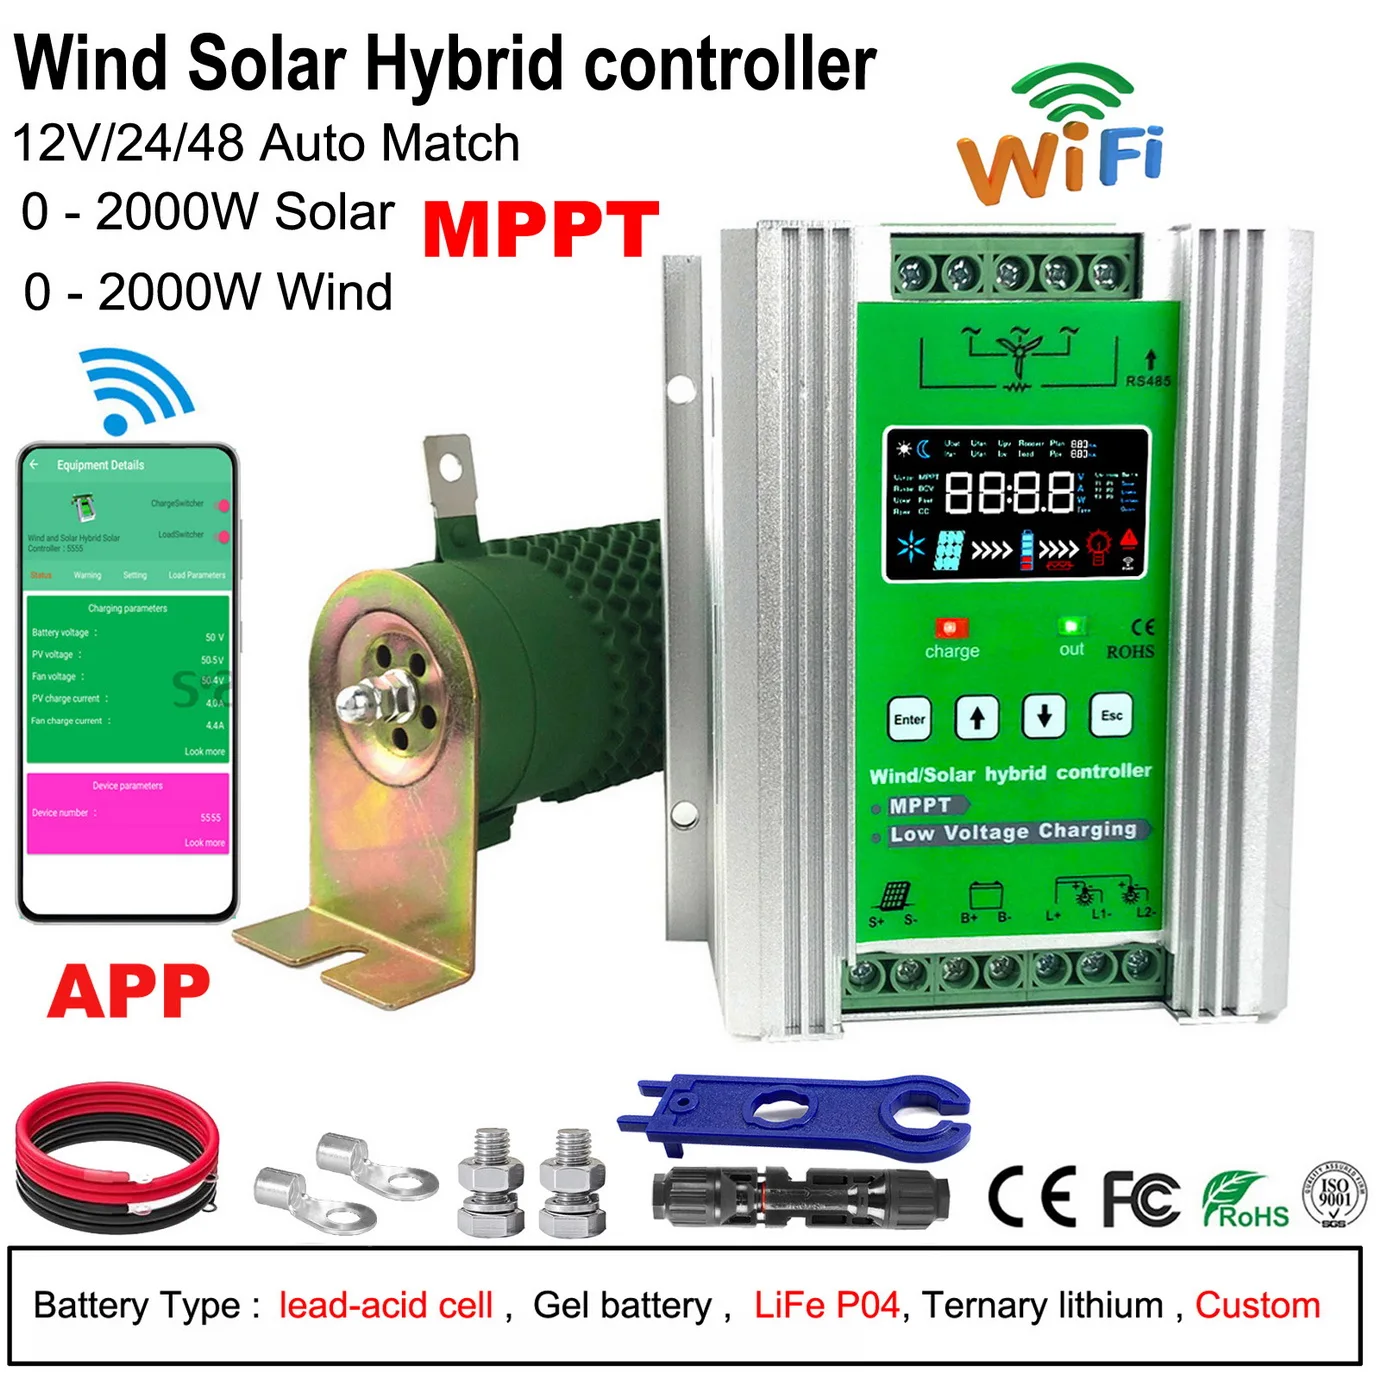 

3000W MPPT Wind Solar Hybrid Charge Controller 12V 24V 48V 60A 100A LCD Display Wifi Monitor Lifepo4 Lithium Lead Acid Battery